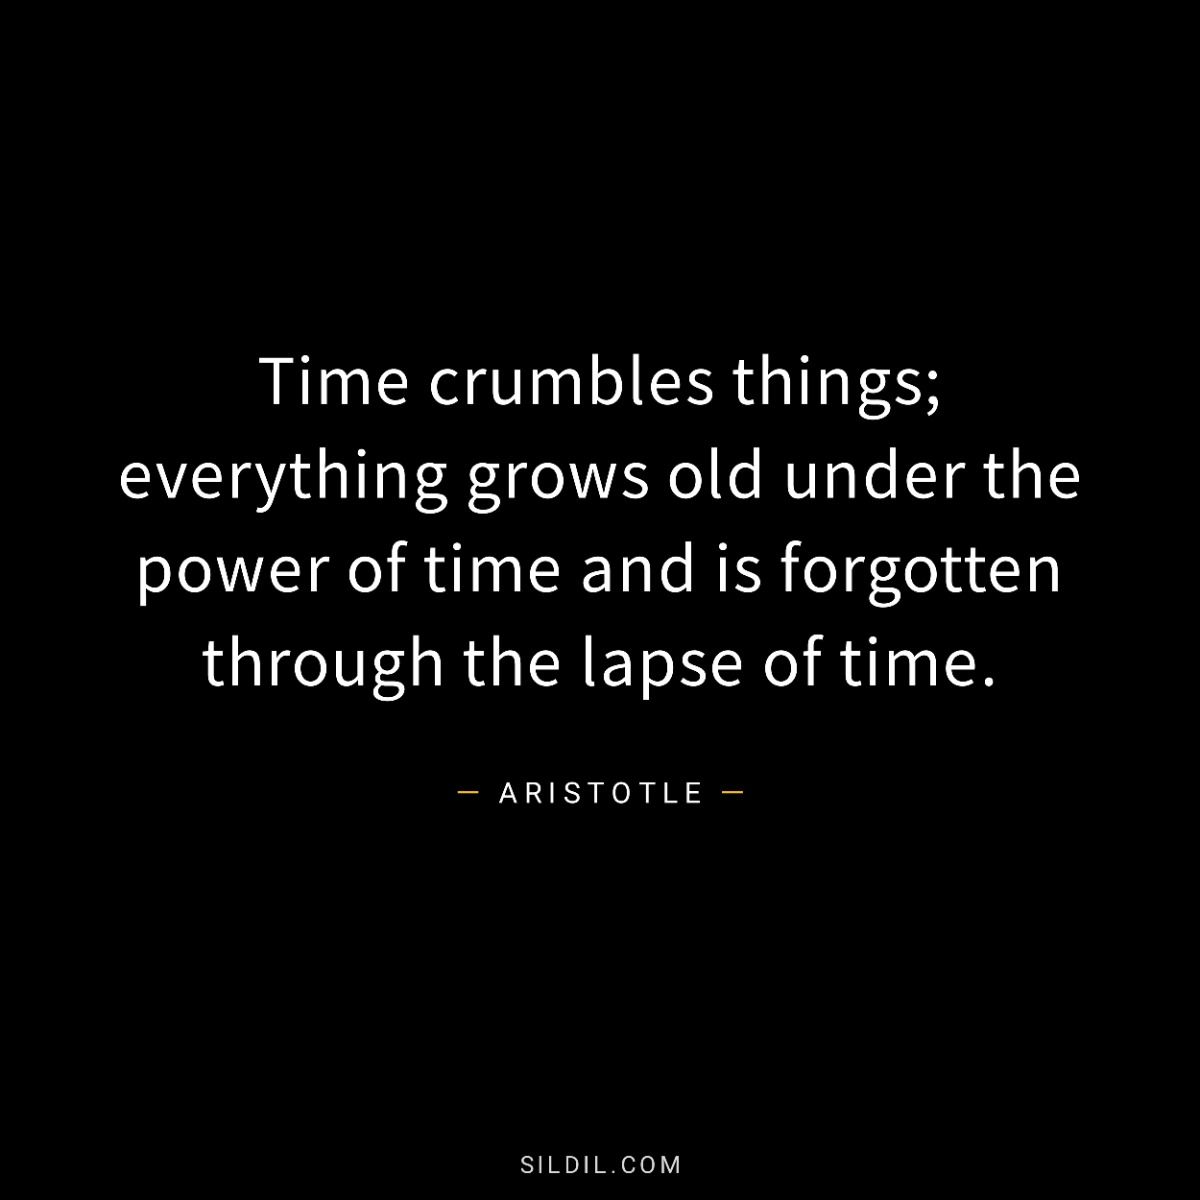 Time crumbles things; everything grows old under the power of time and is forgotten through the lapse of time.